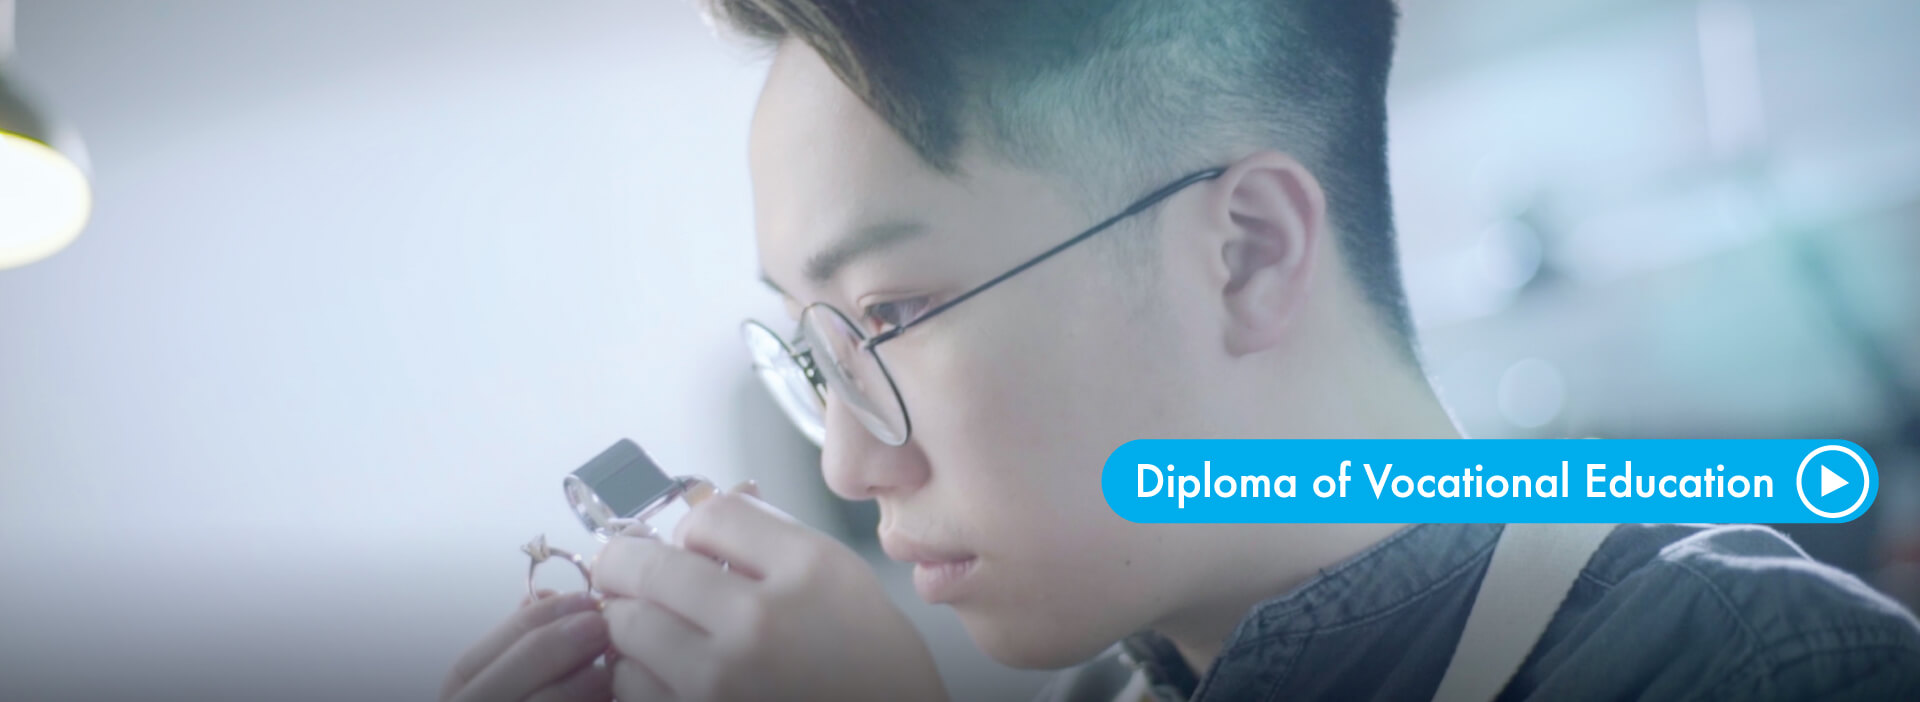 Diploma of Vocational Education 